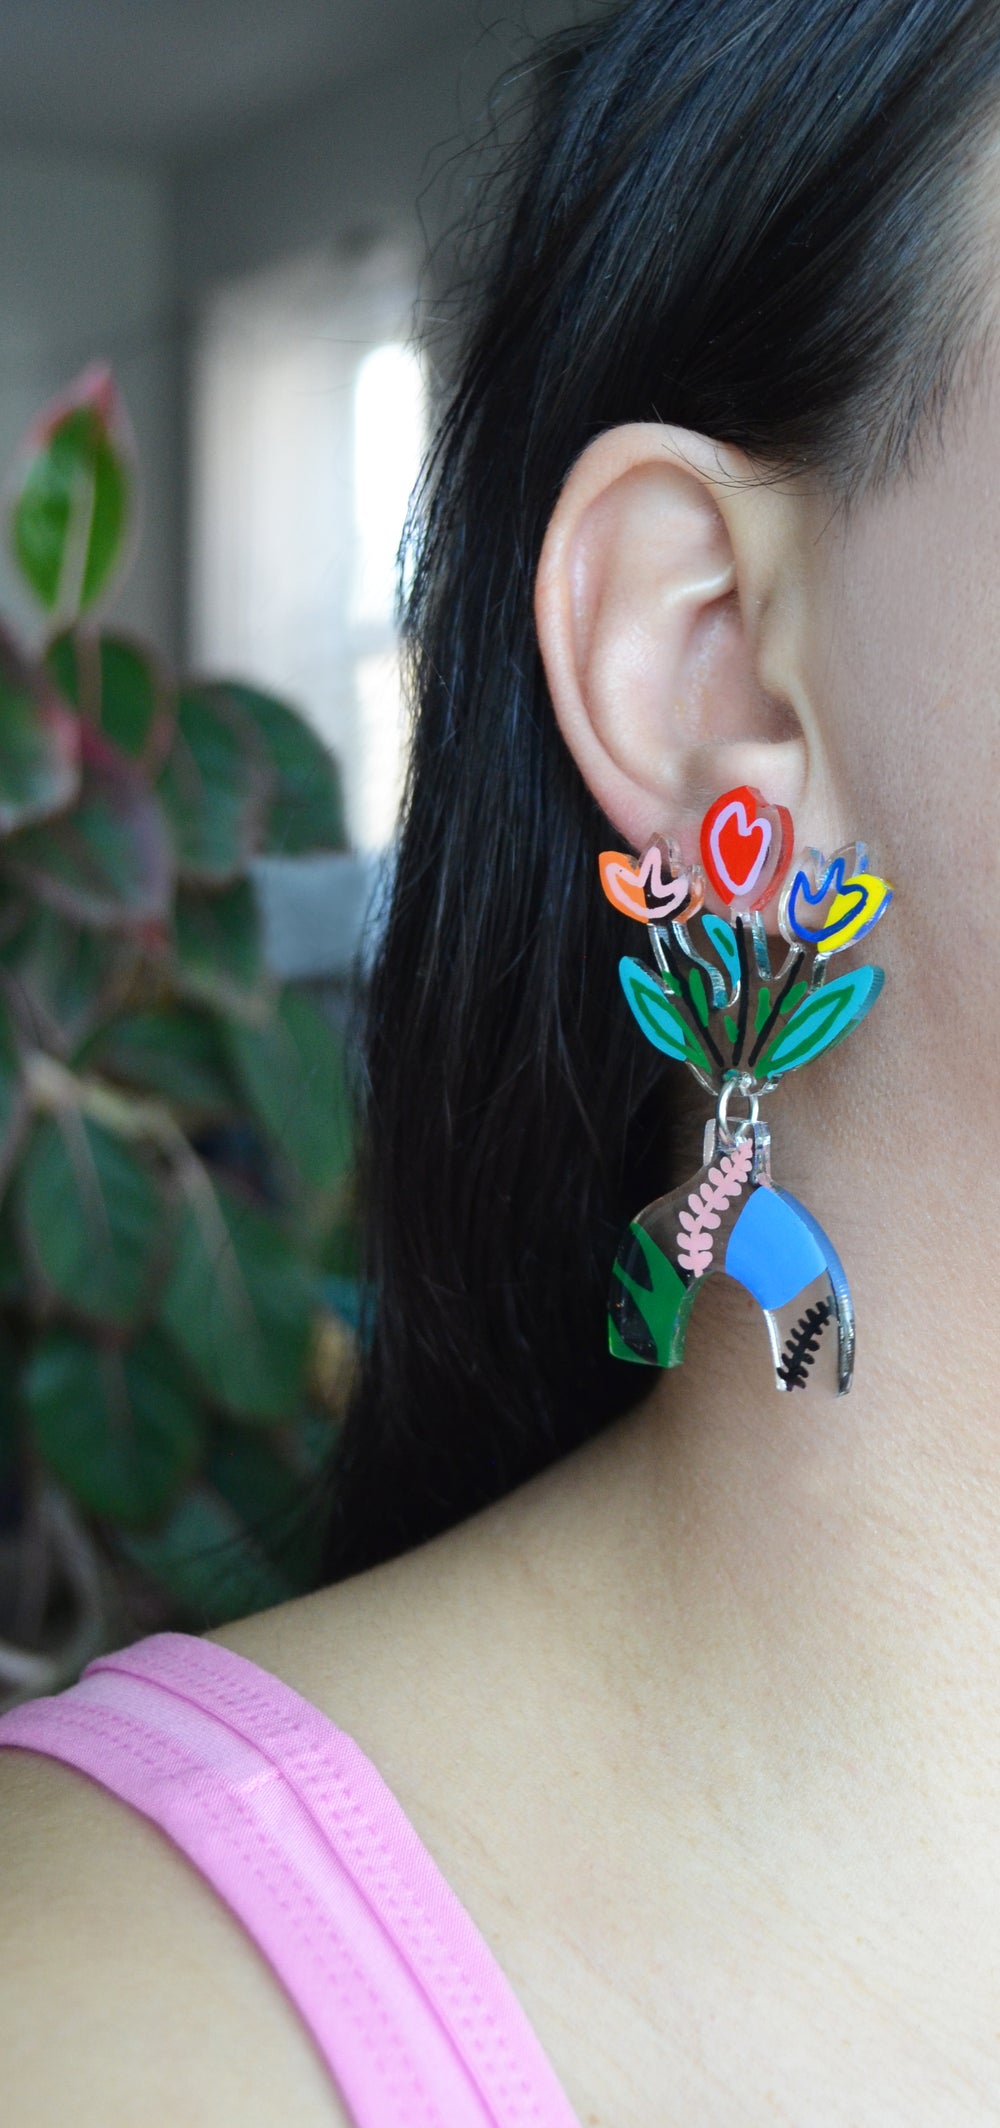 Abstract Art Vase Earrings with Colorful Tulips